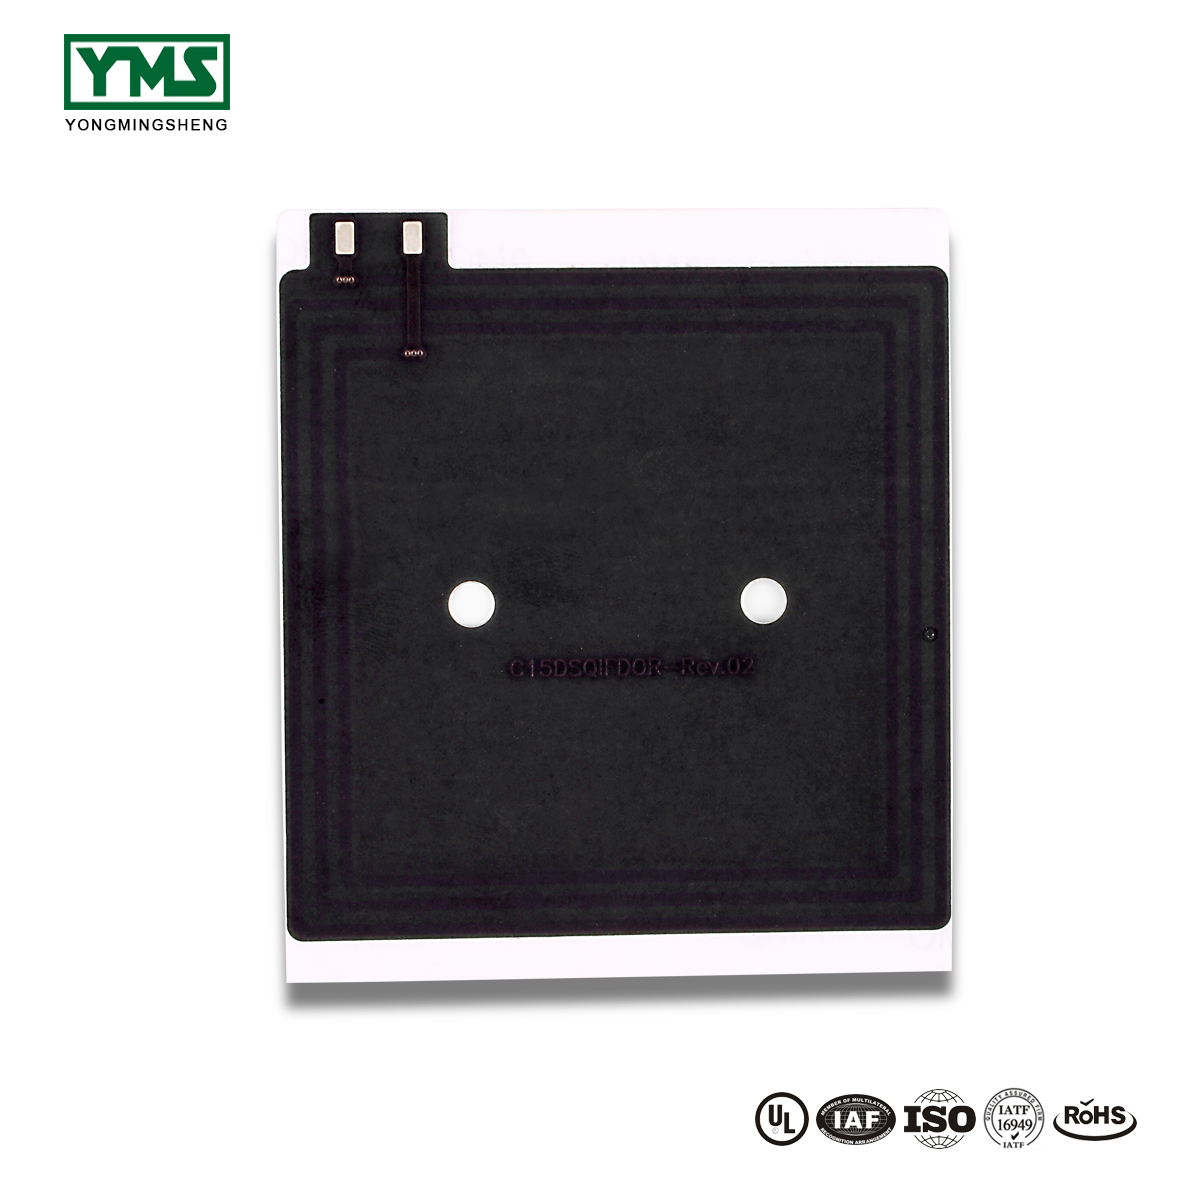 2017 Good Quality Specializing Thermometer Pcb - 1Layer Black solder mask Flexible Board | YMSPCB – Yongmingsheng